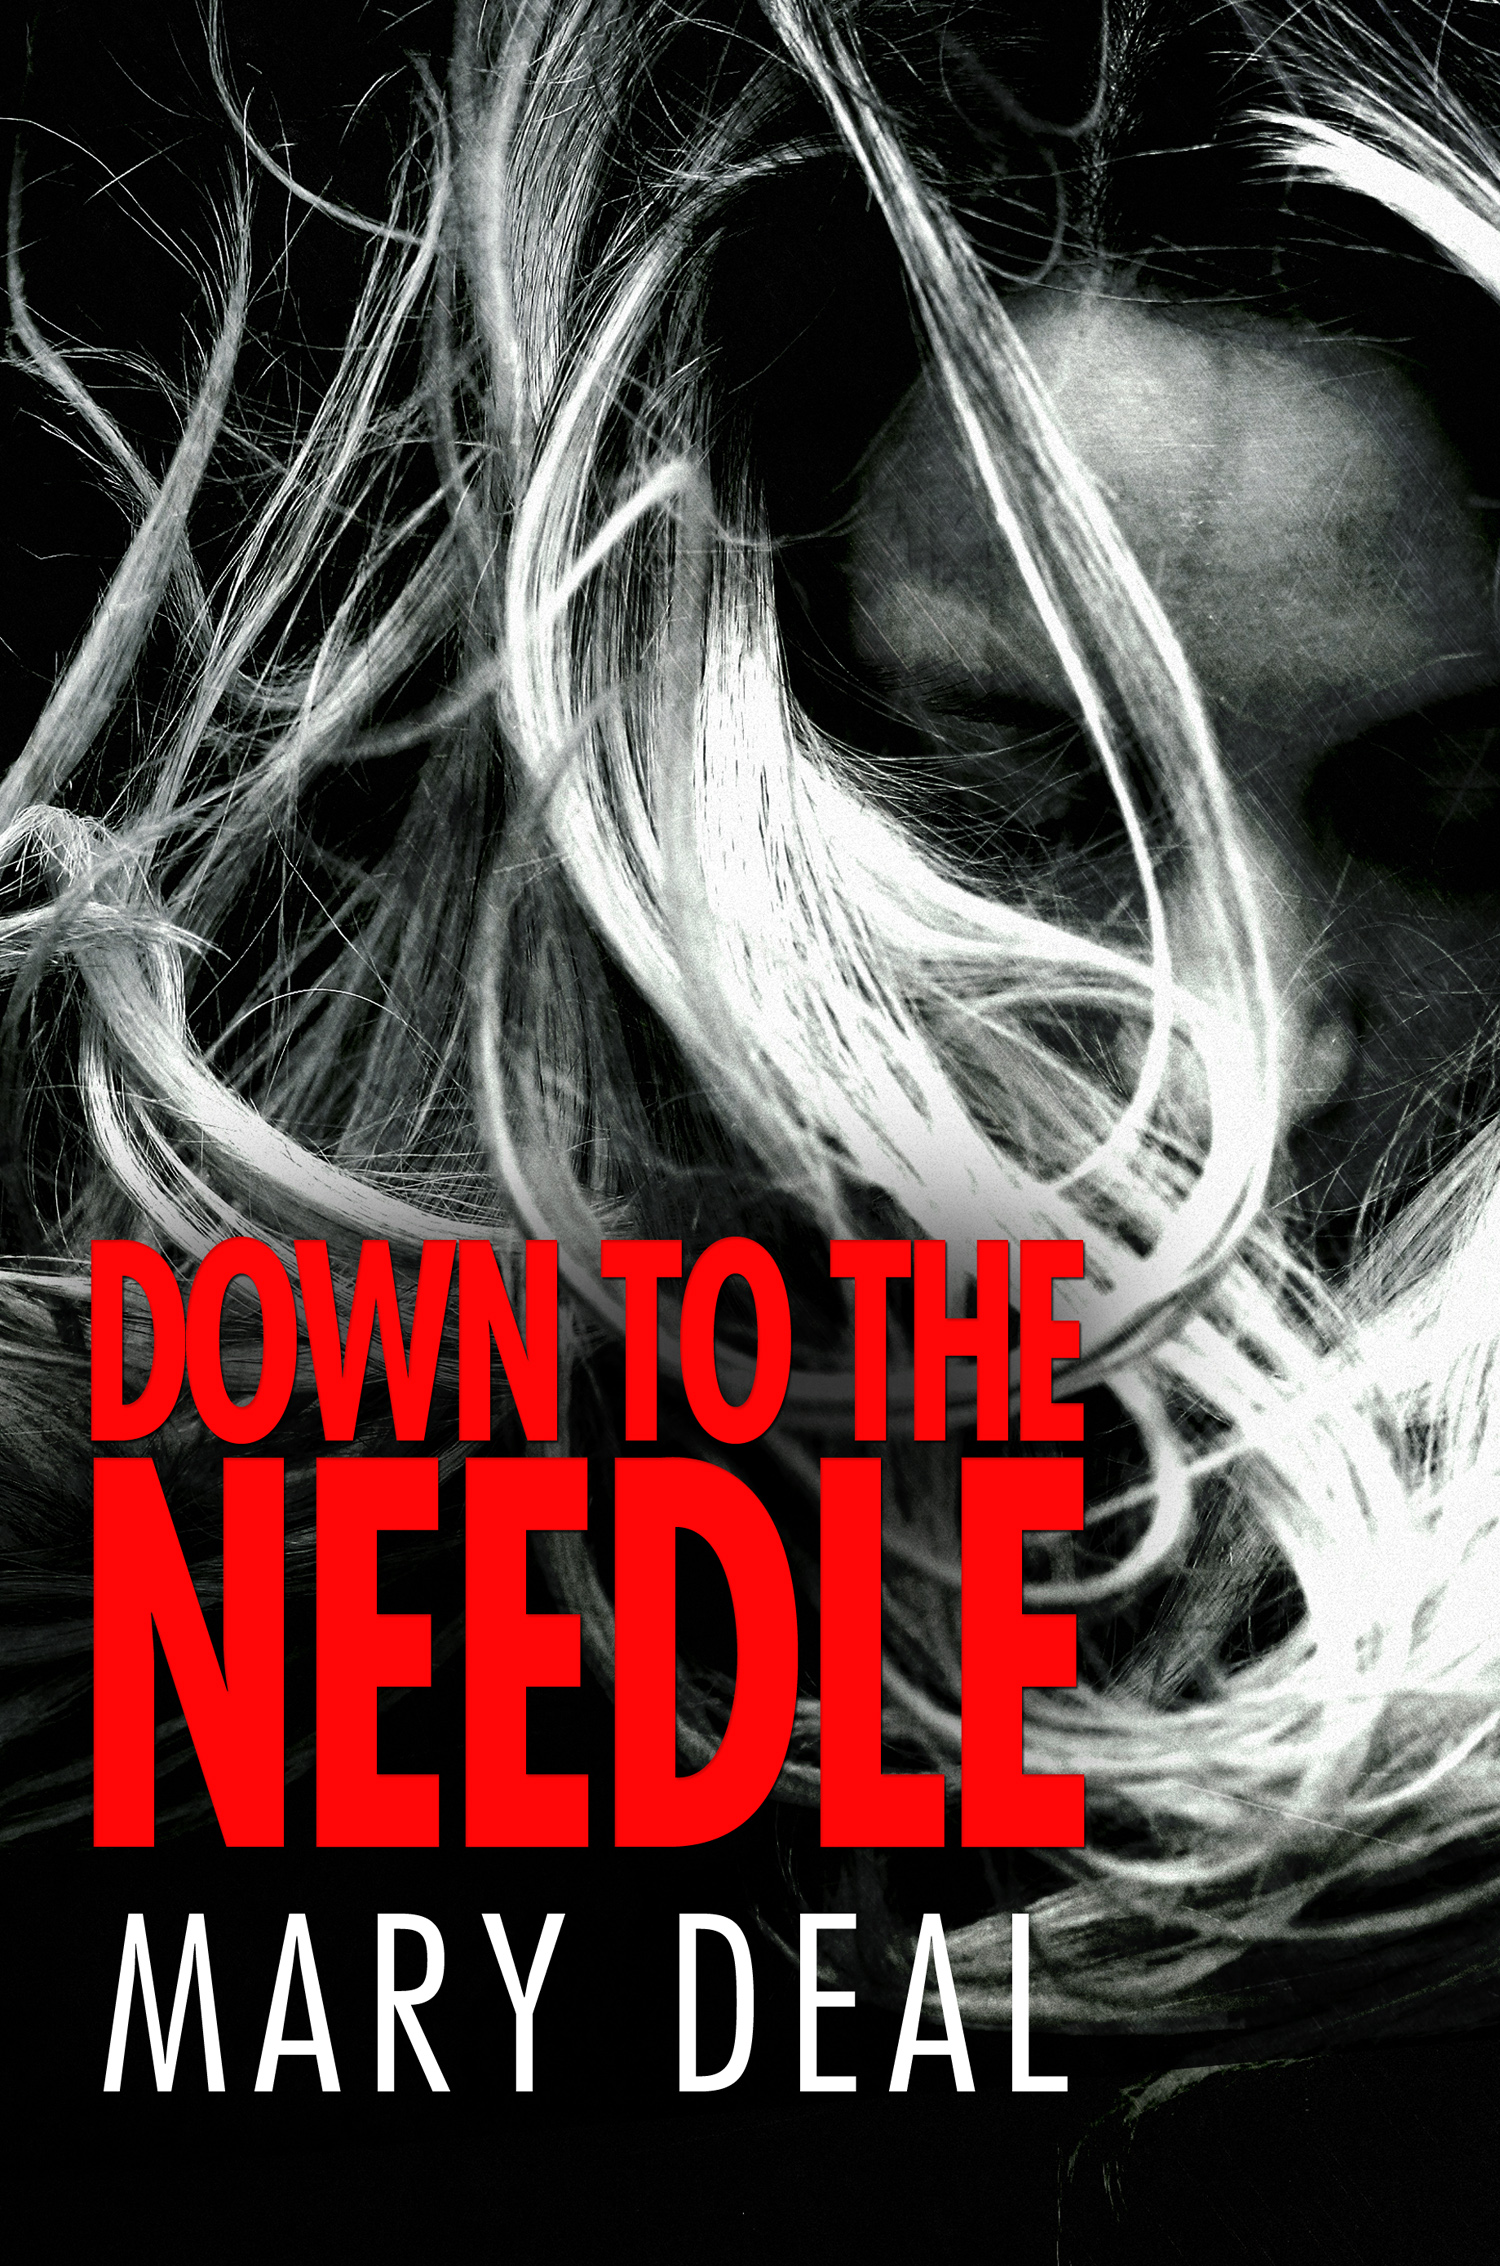 FREE: Down To The Needle by Mary Deal